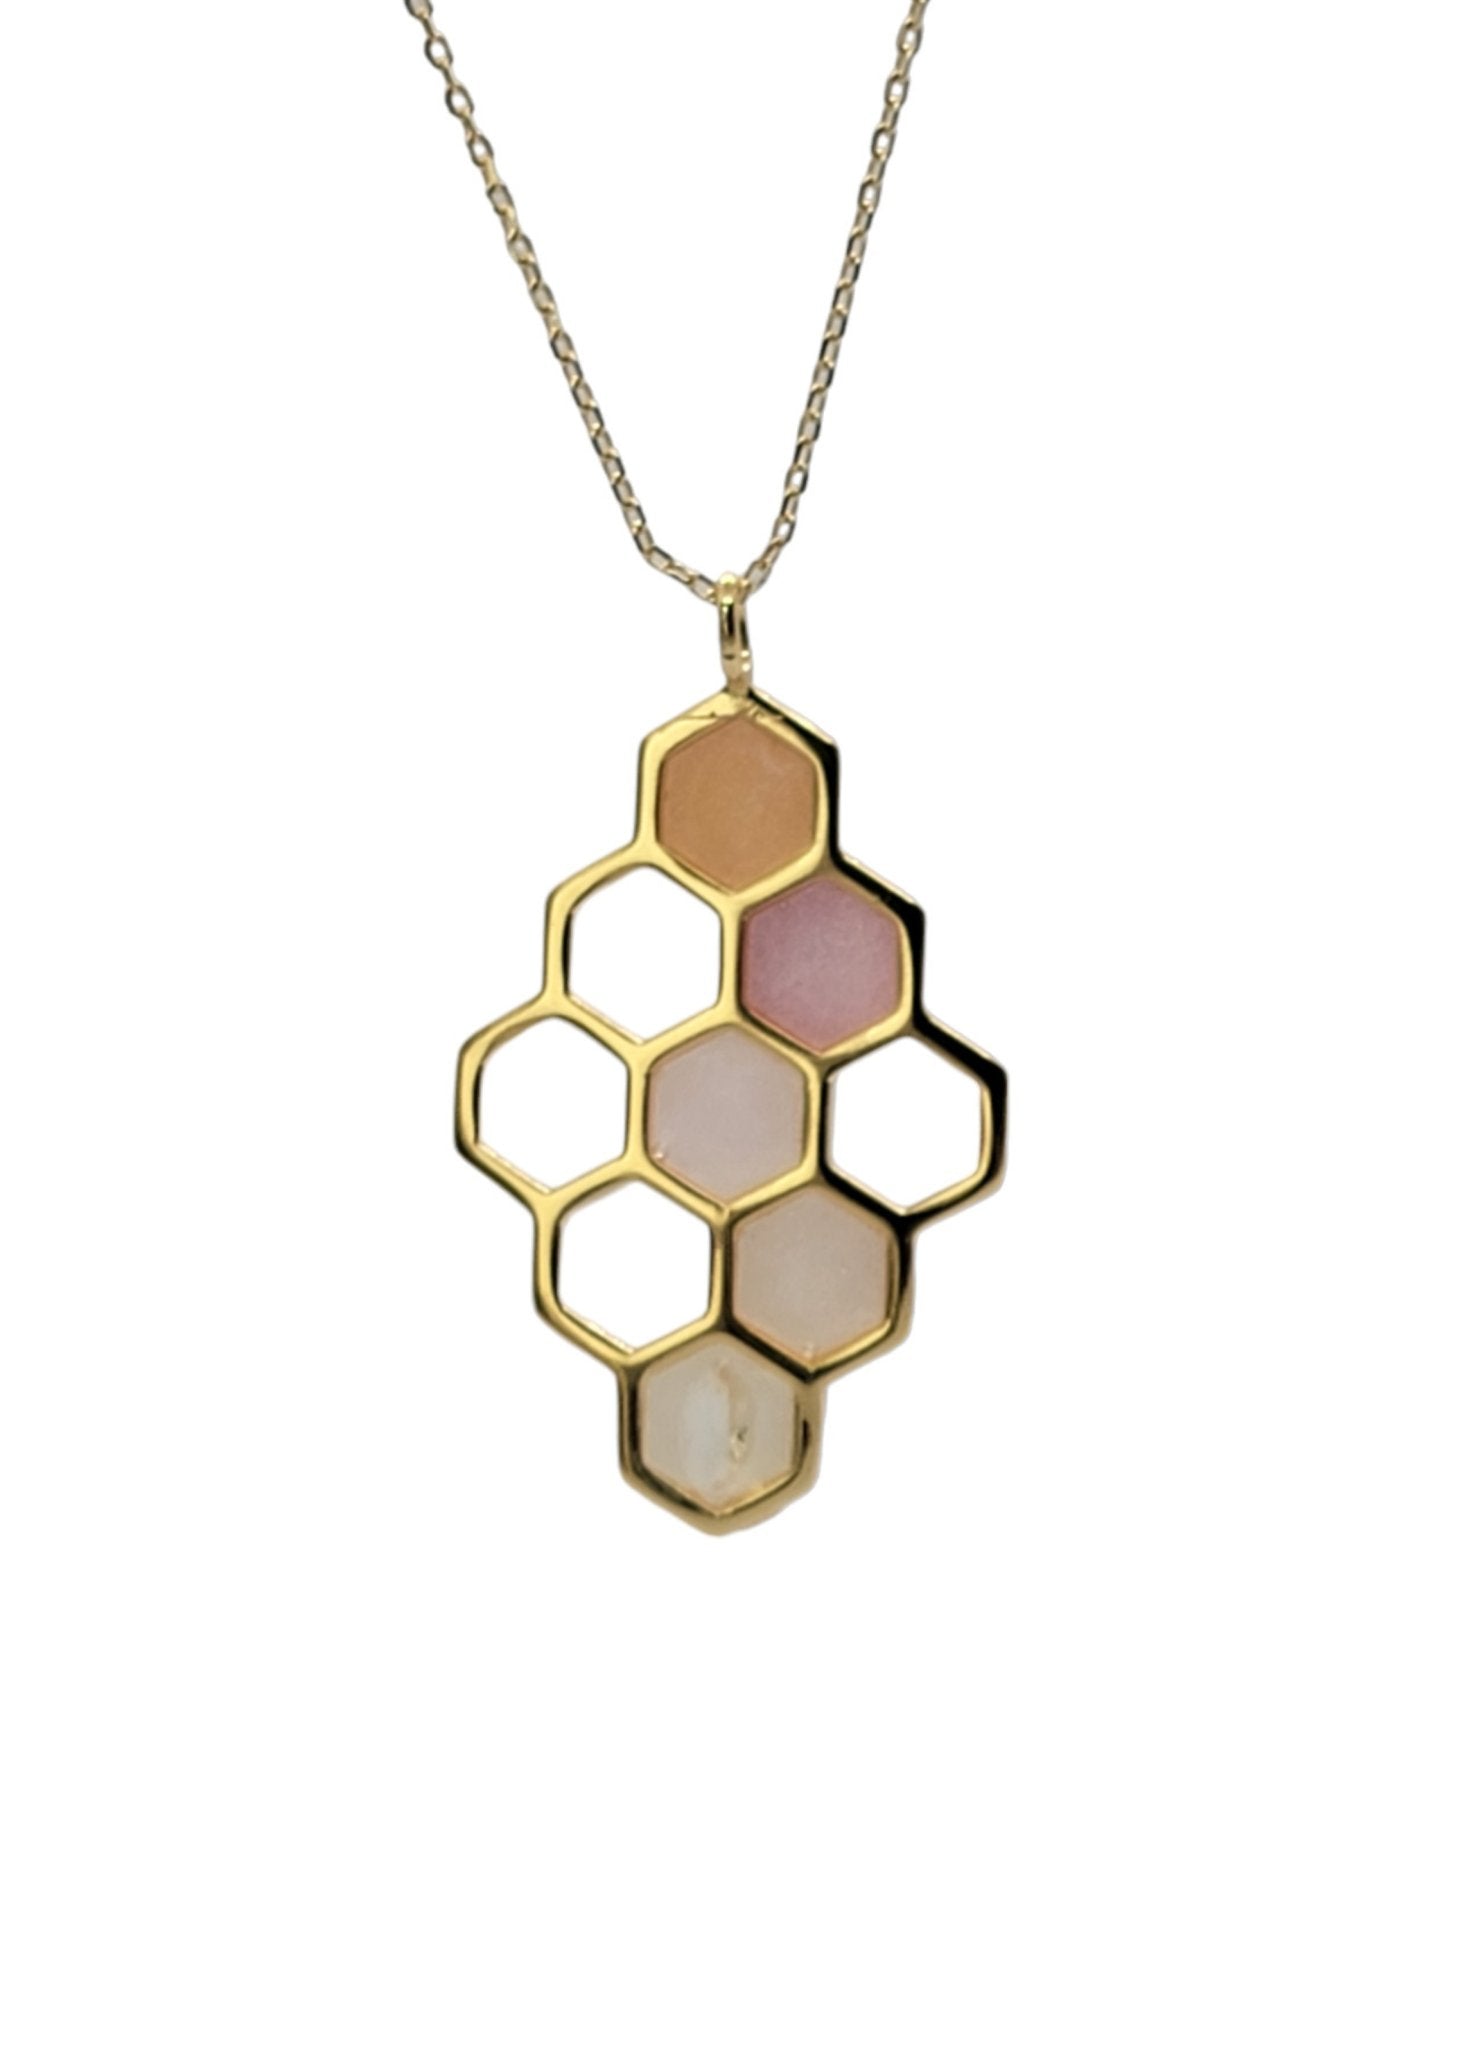 Gold Honeycomb Necklace with Citrine gemstone and Pink and Gold Resins